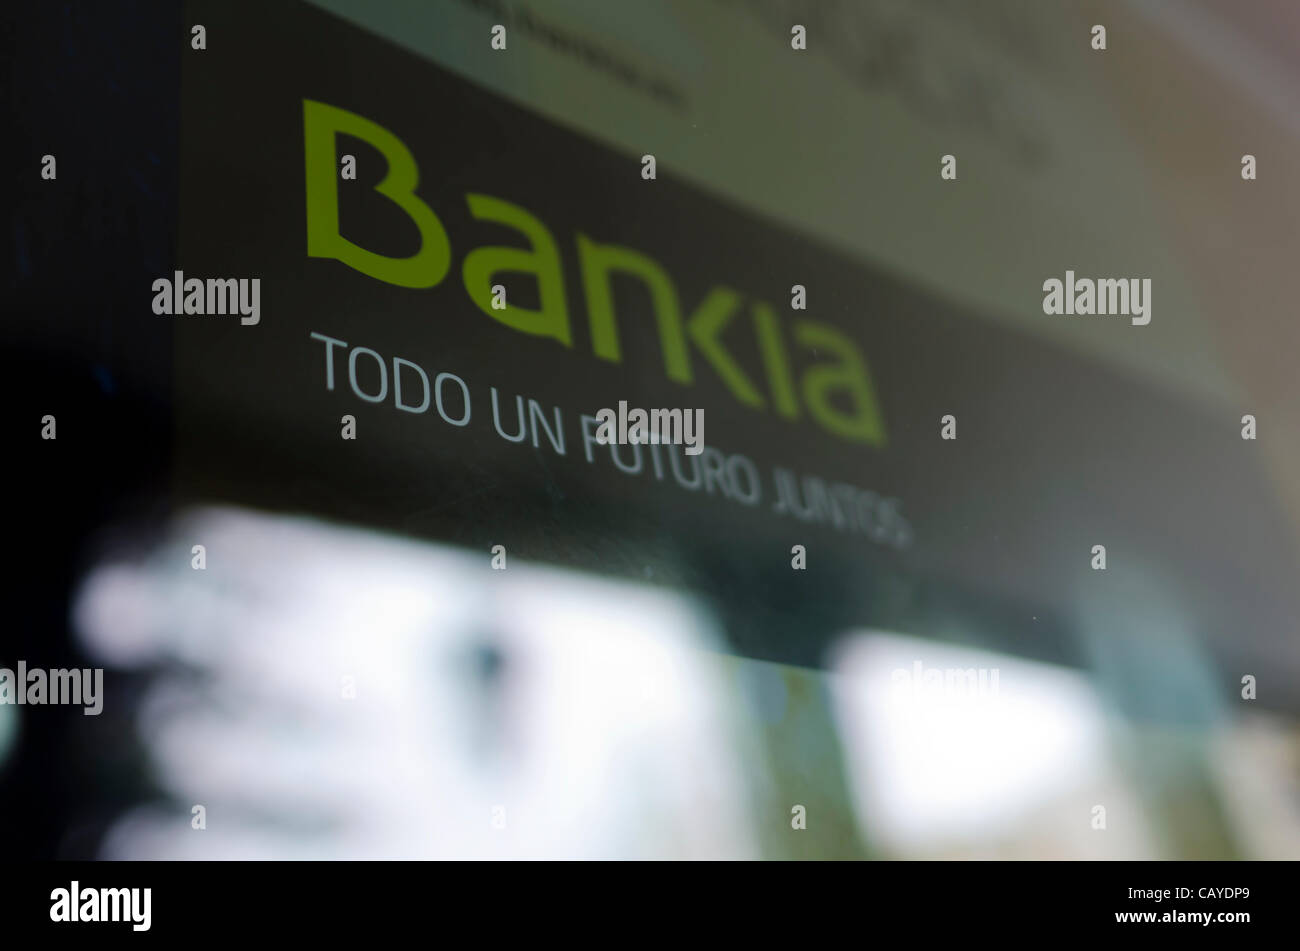 Madrid, Spain on Monday May 8, 2012, a 'Bankia' office the day after former International Monetary Fund chairman, Rodrigo Rato, resings as Spanish bank 'Bankia' chairman. Bankia is the Spain’s fourth-biggest lender in terms of assets and Bank of Spain and government prepare Bankia refinancing plan. Stock Photo